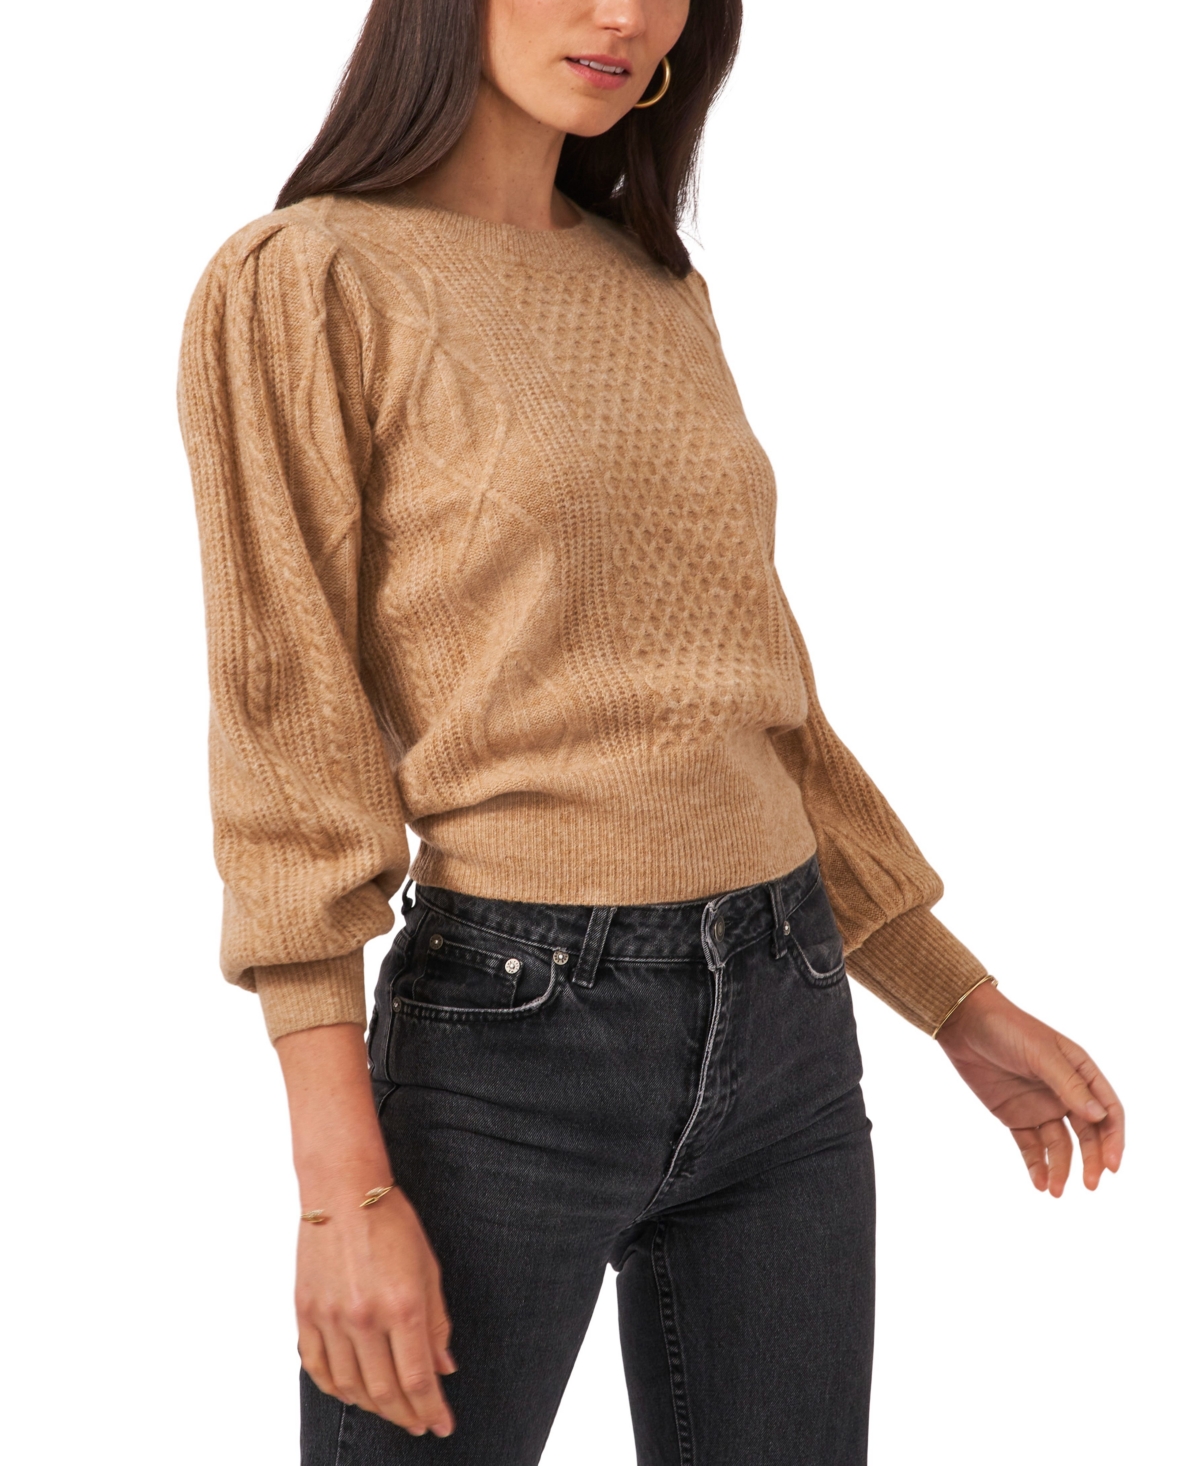 Women's Variegated Cables Crew Neck Sweater - Teal